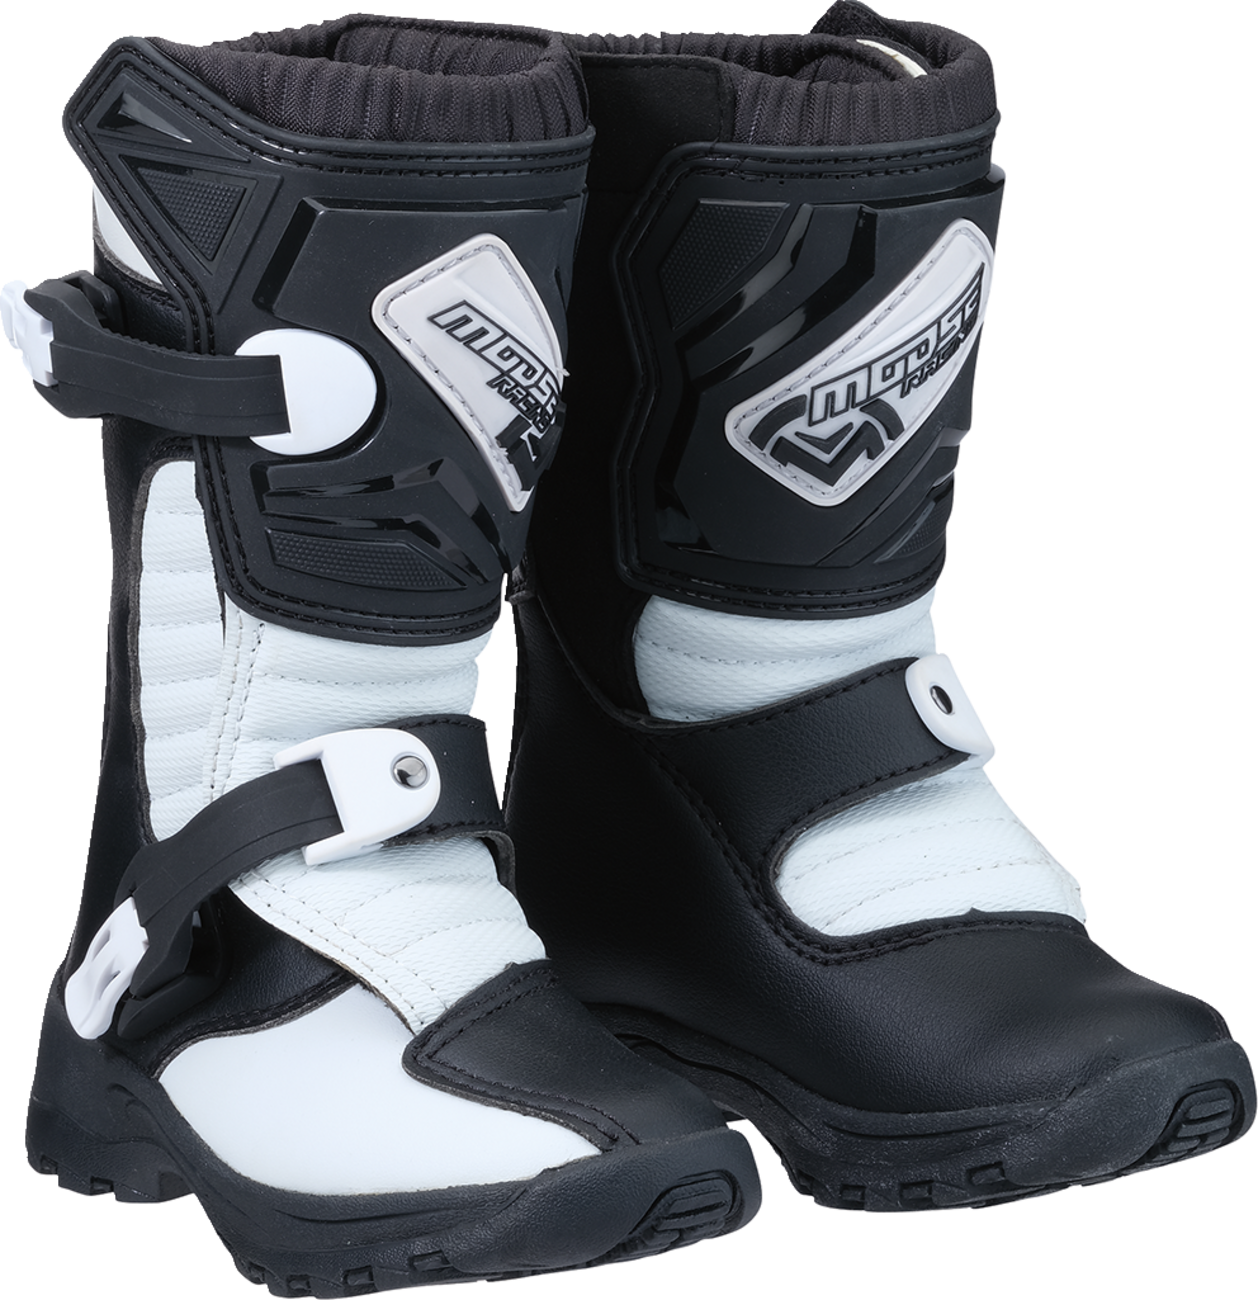 MOOSE RACING M1.3 Boots - Black/White - Size 2 3411-0431